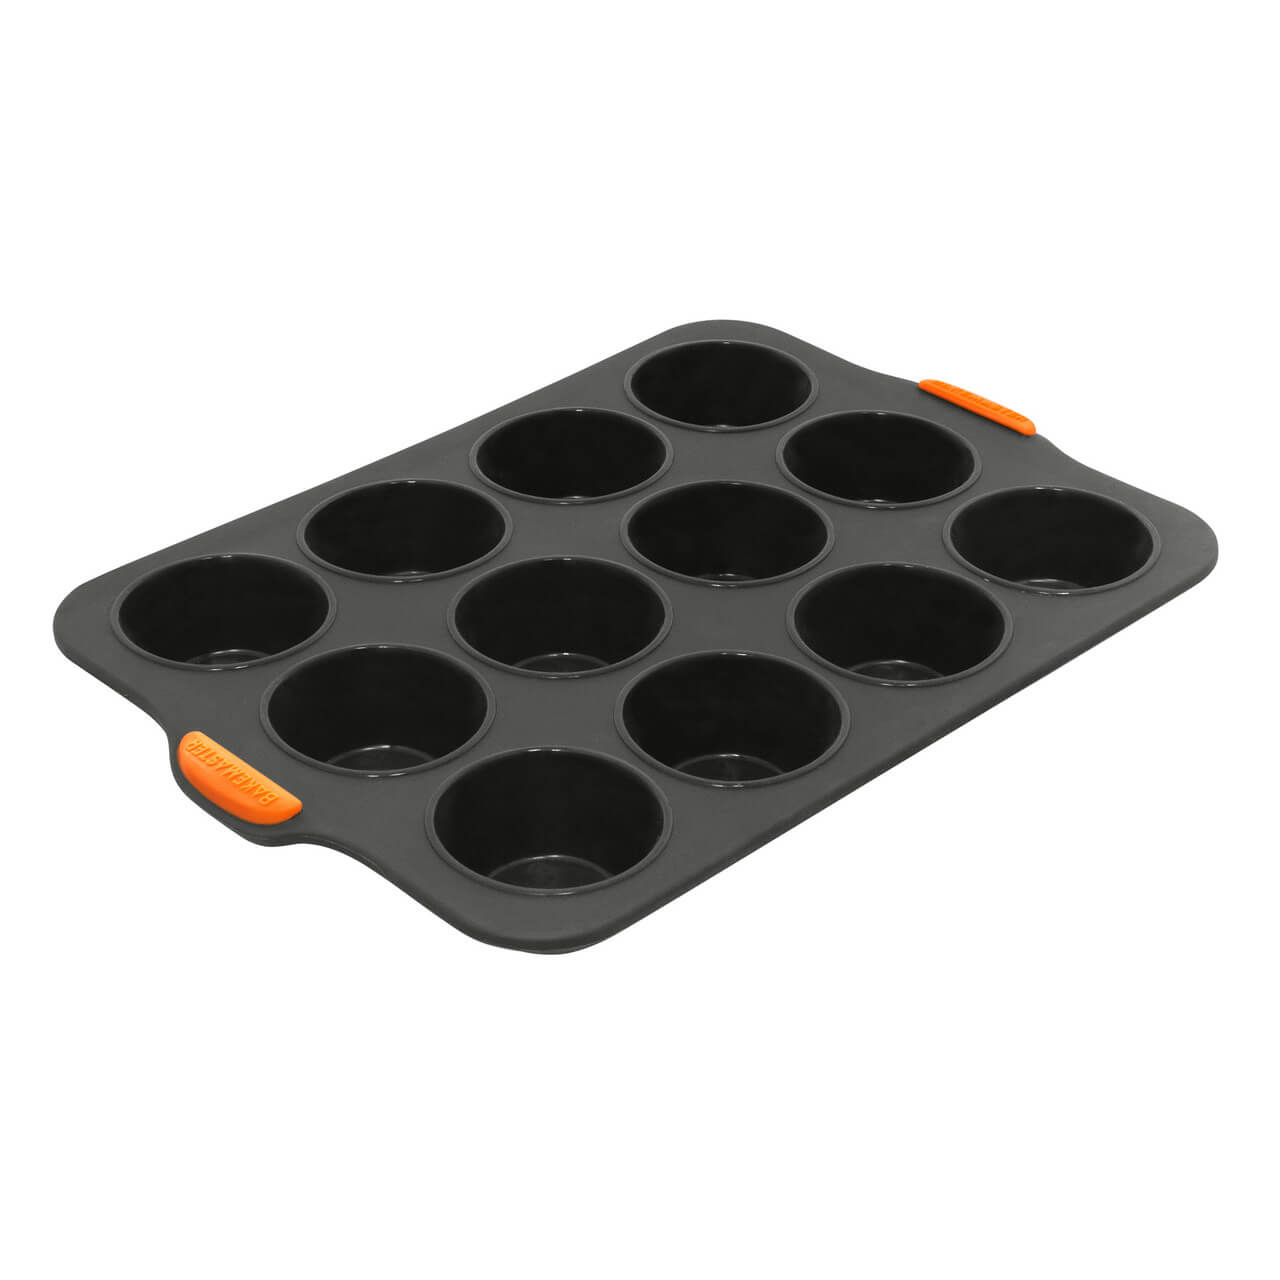 Bakemaster Silicone Muffin Pan 12cup